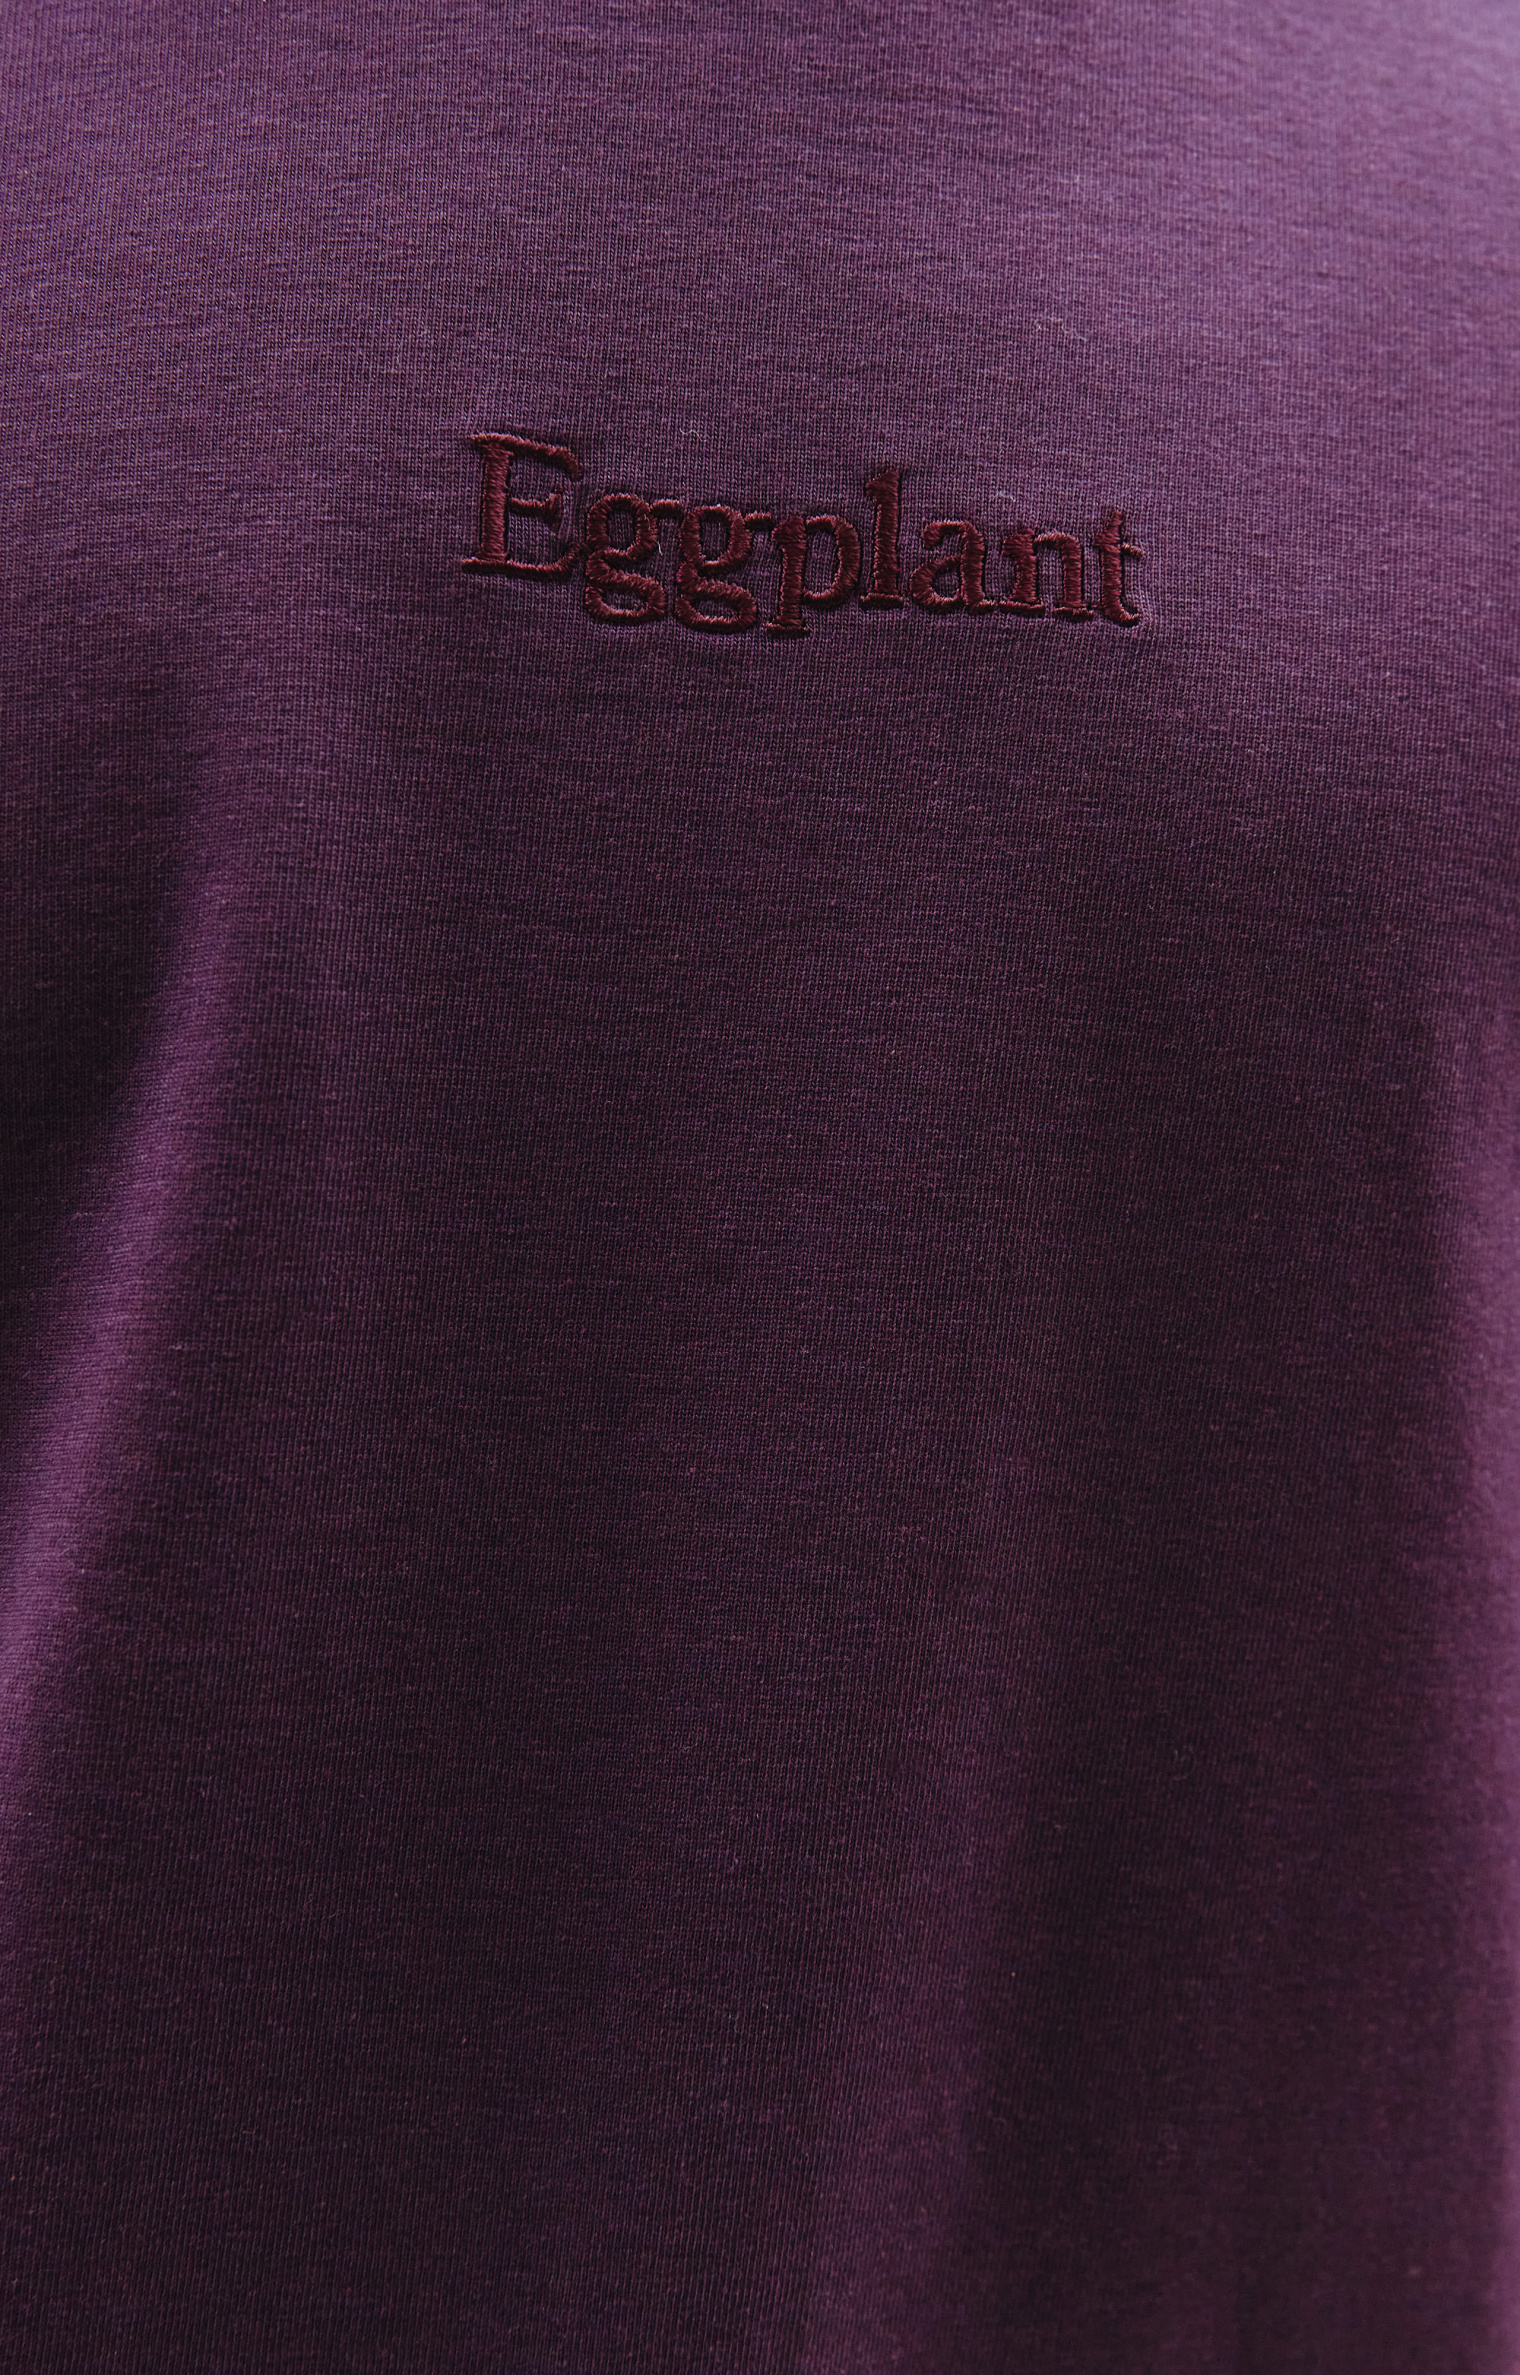 Doublet Embroidery eggplant t-shirt